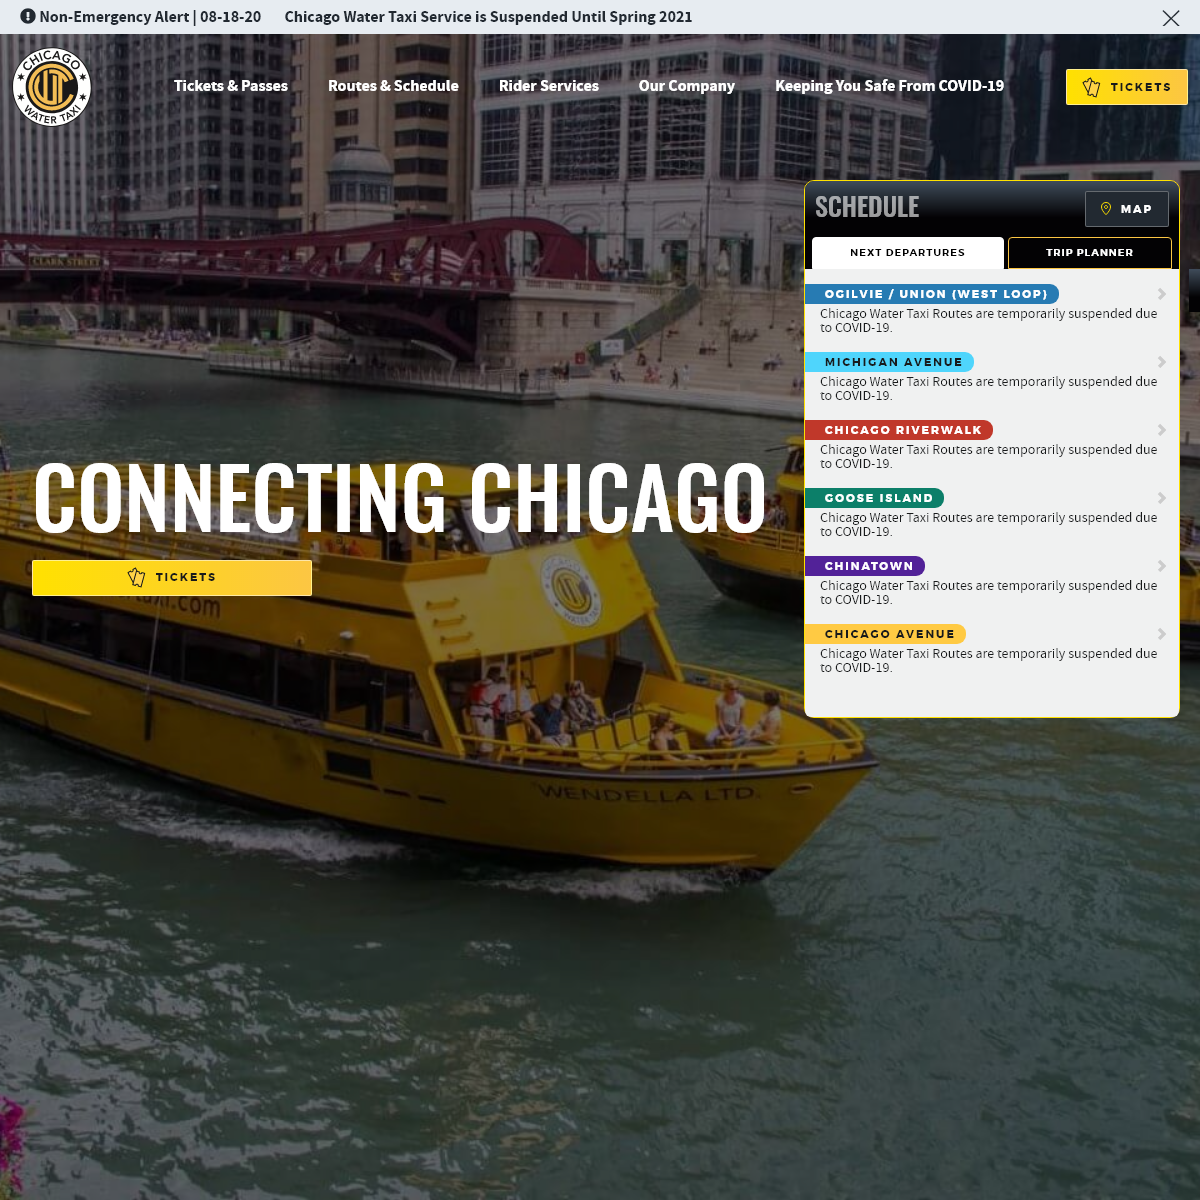 A complete backup of chicagowatertaxi.com